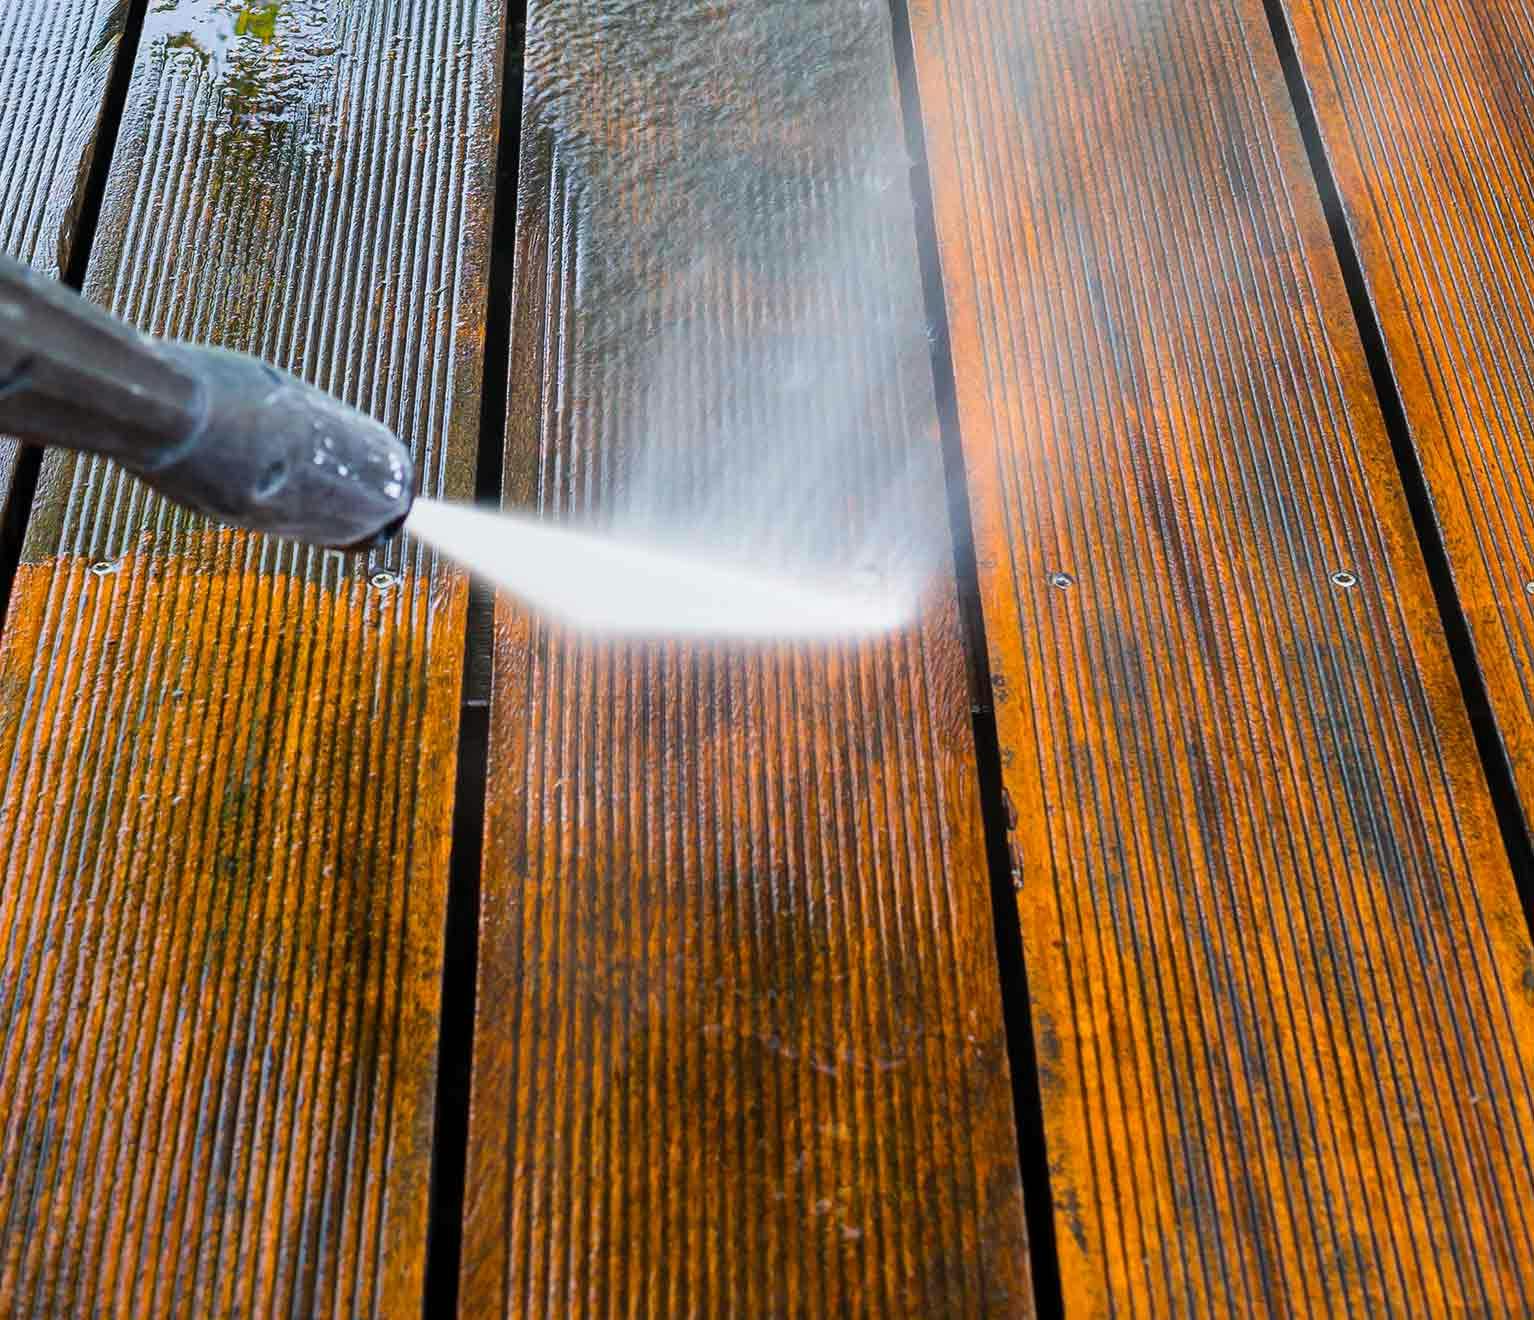 Image of a pressure washer cleaning a household deck.